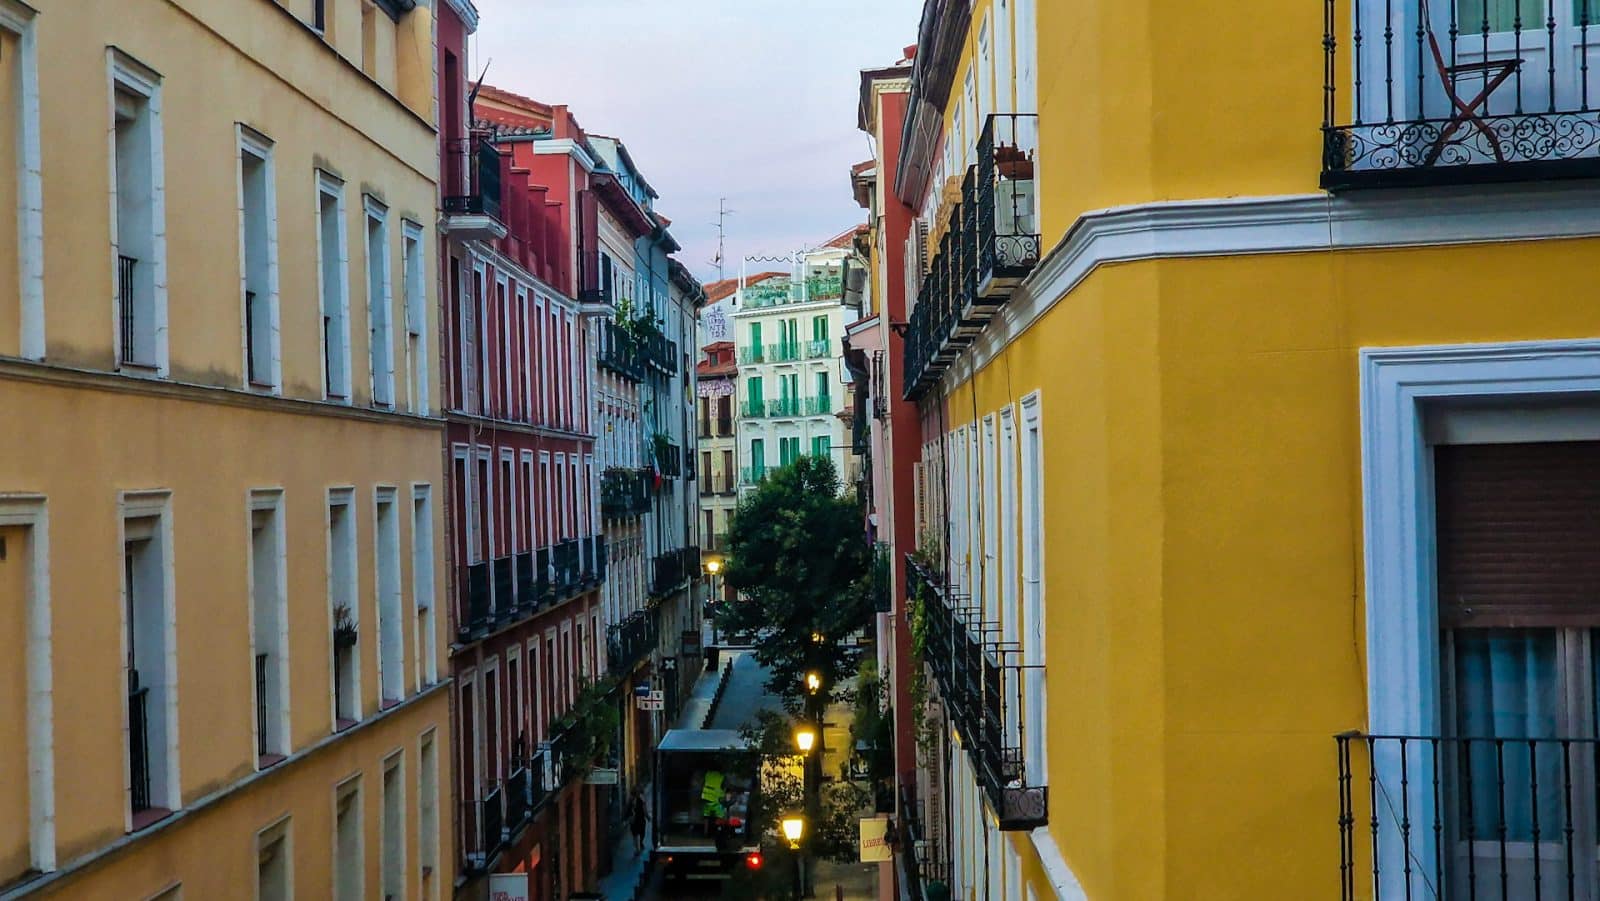 What makes malasaña such a unique Madrid neighborhood